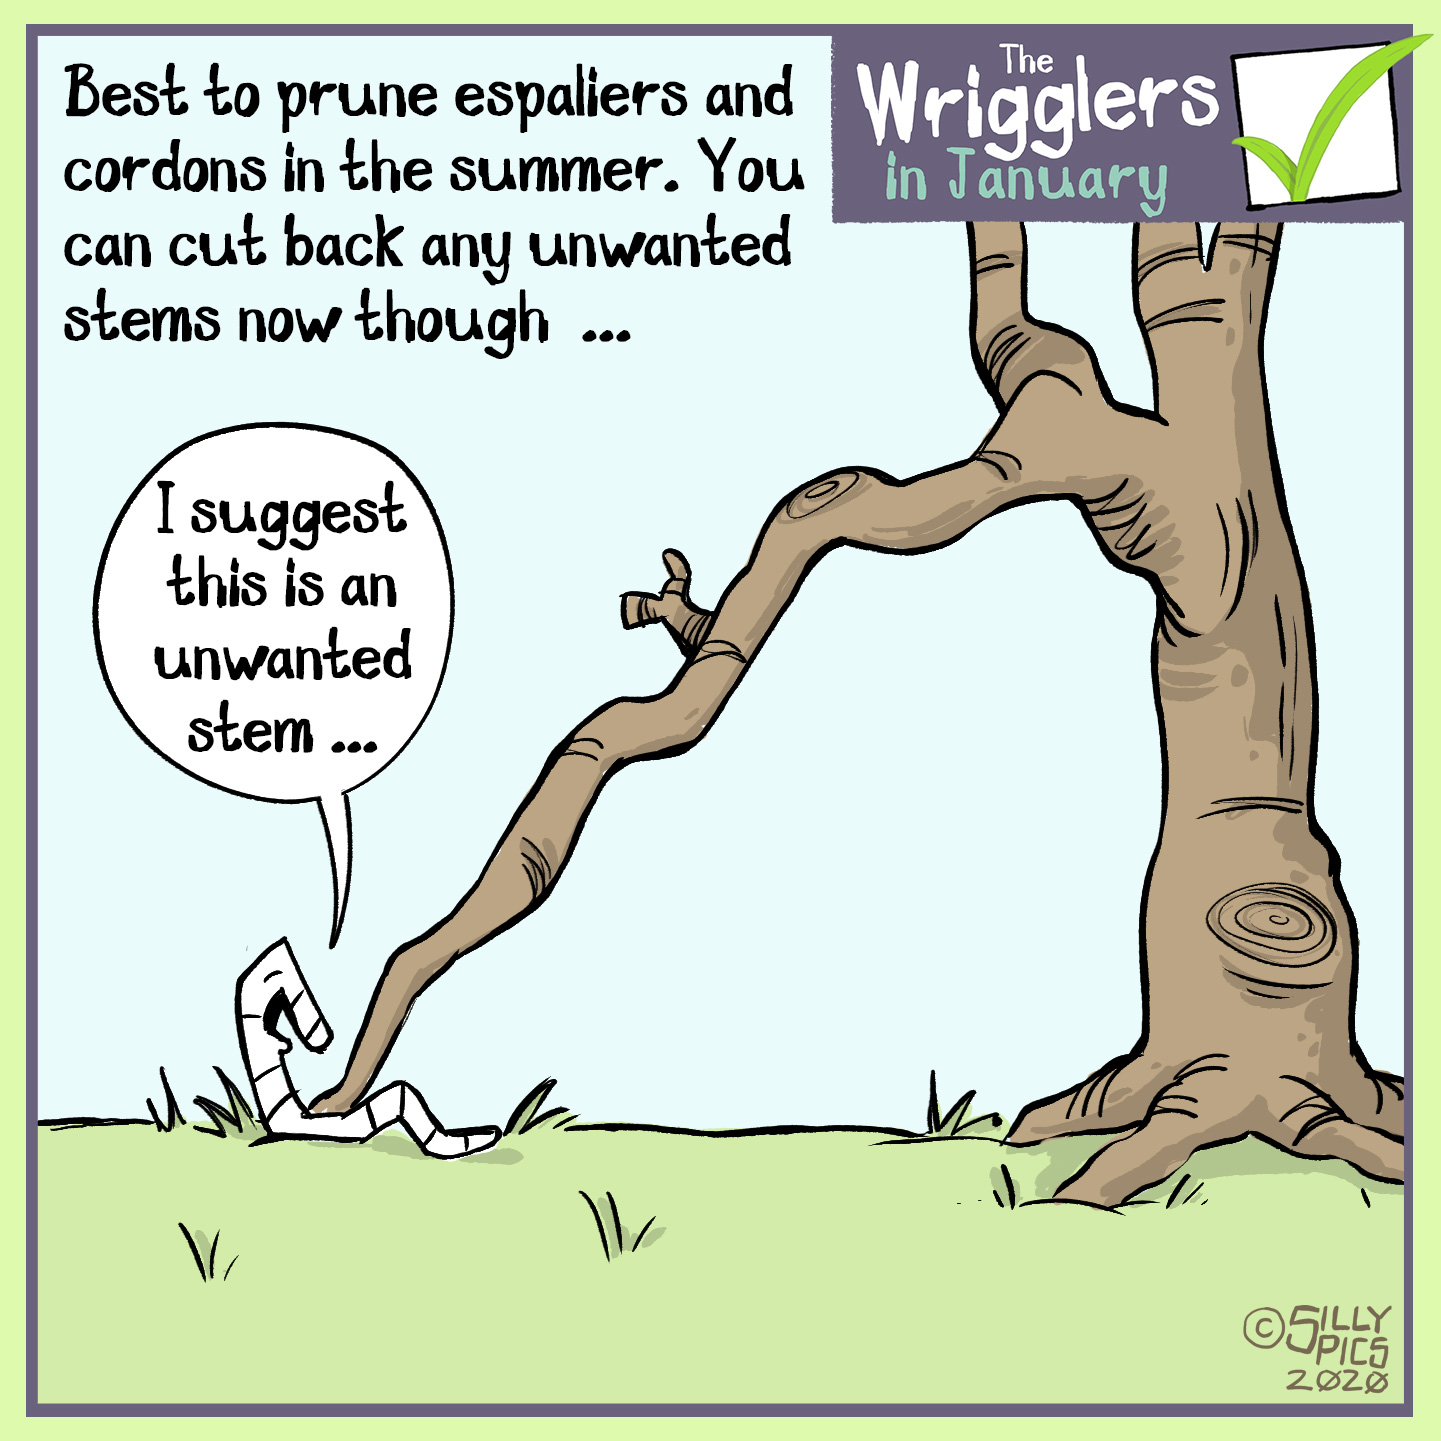 cartoon on cutting back espalier and cordons, best to prune in summer